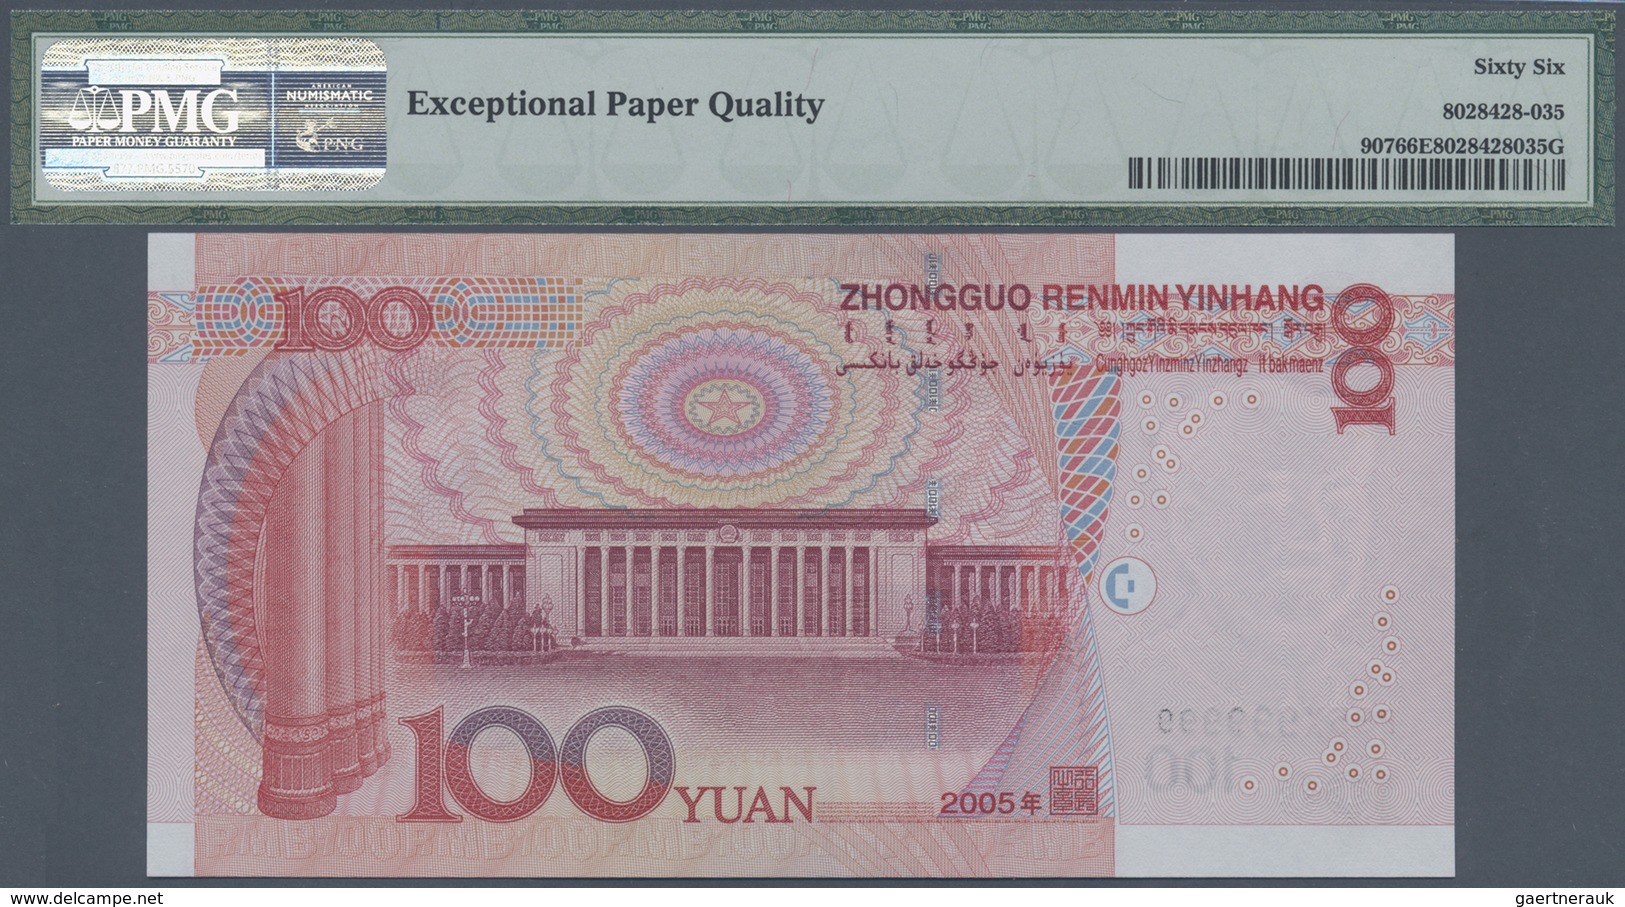 China: set of 10 pcs 100 Yuan 2005 P. 907 with interesting serial numbers, all PMG graded, containin